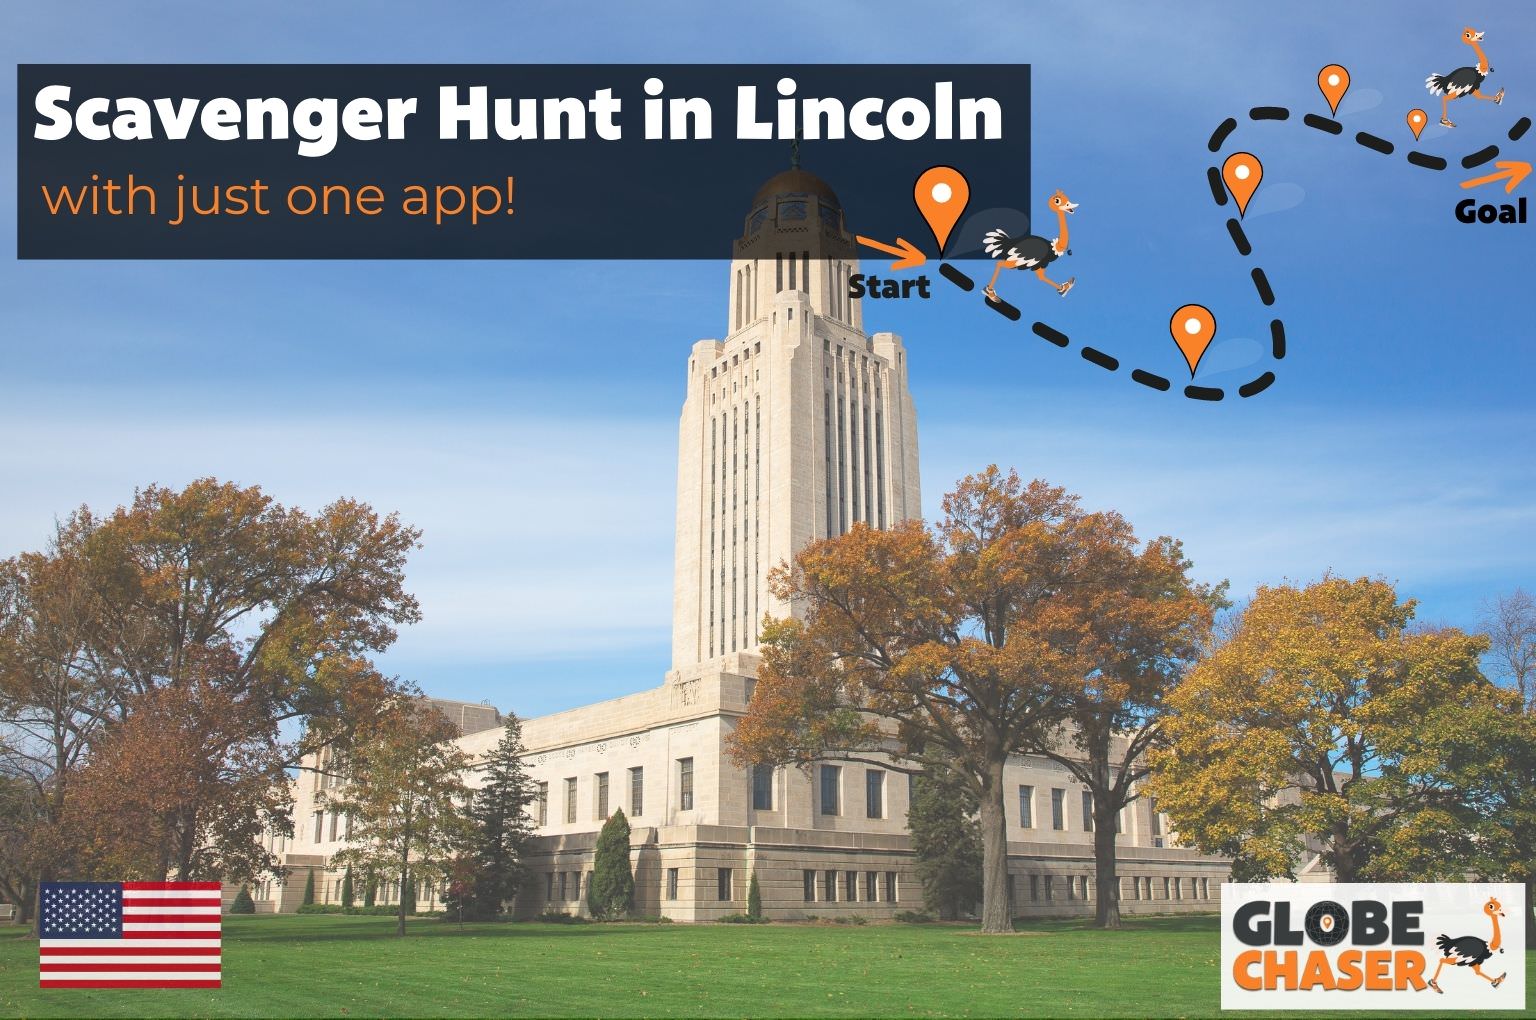 Scavenger Hunt in Lincoln, USA - Family Activities with the Globe Chaser App for Outdoor Fun